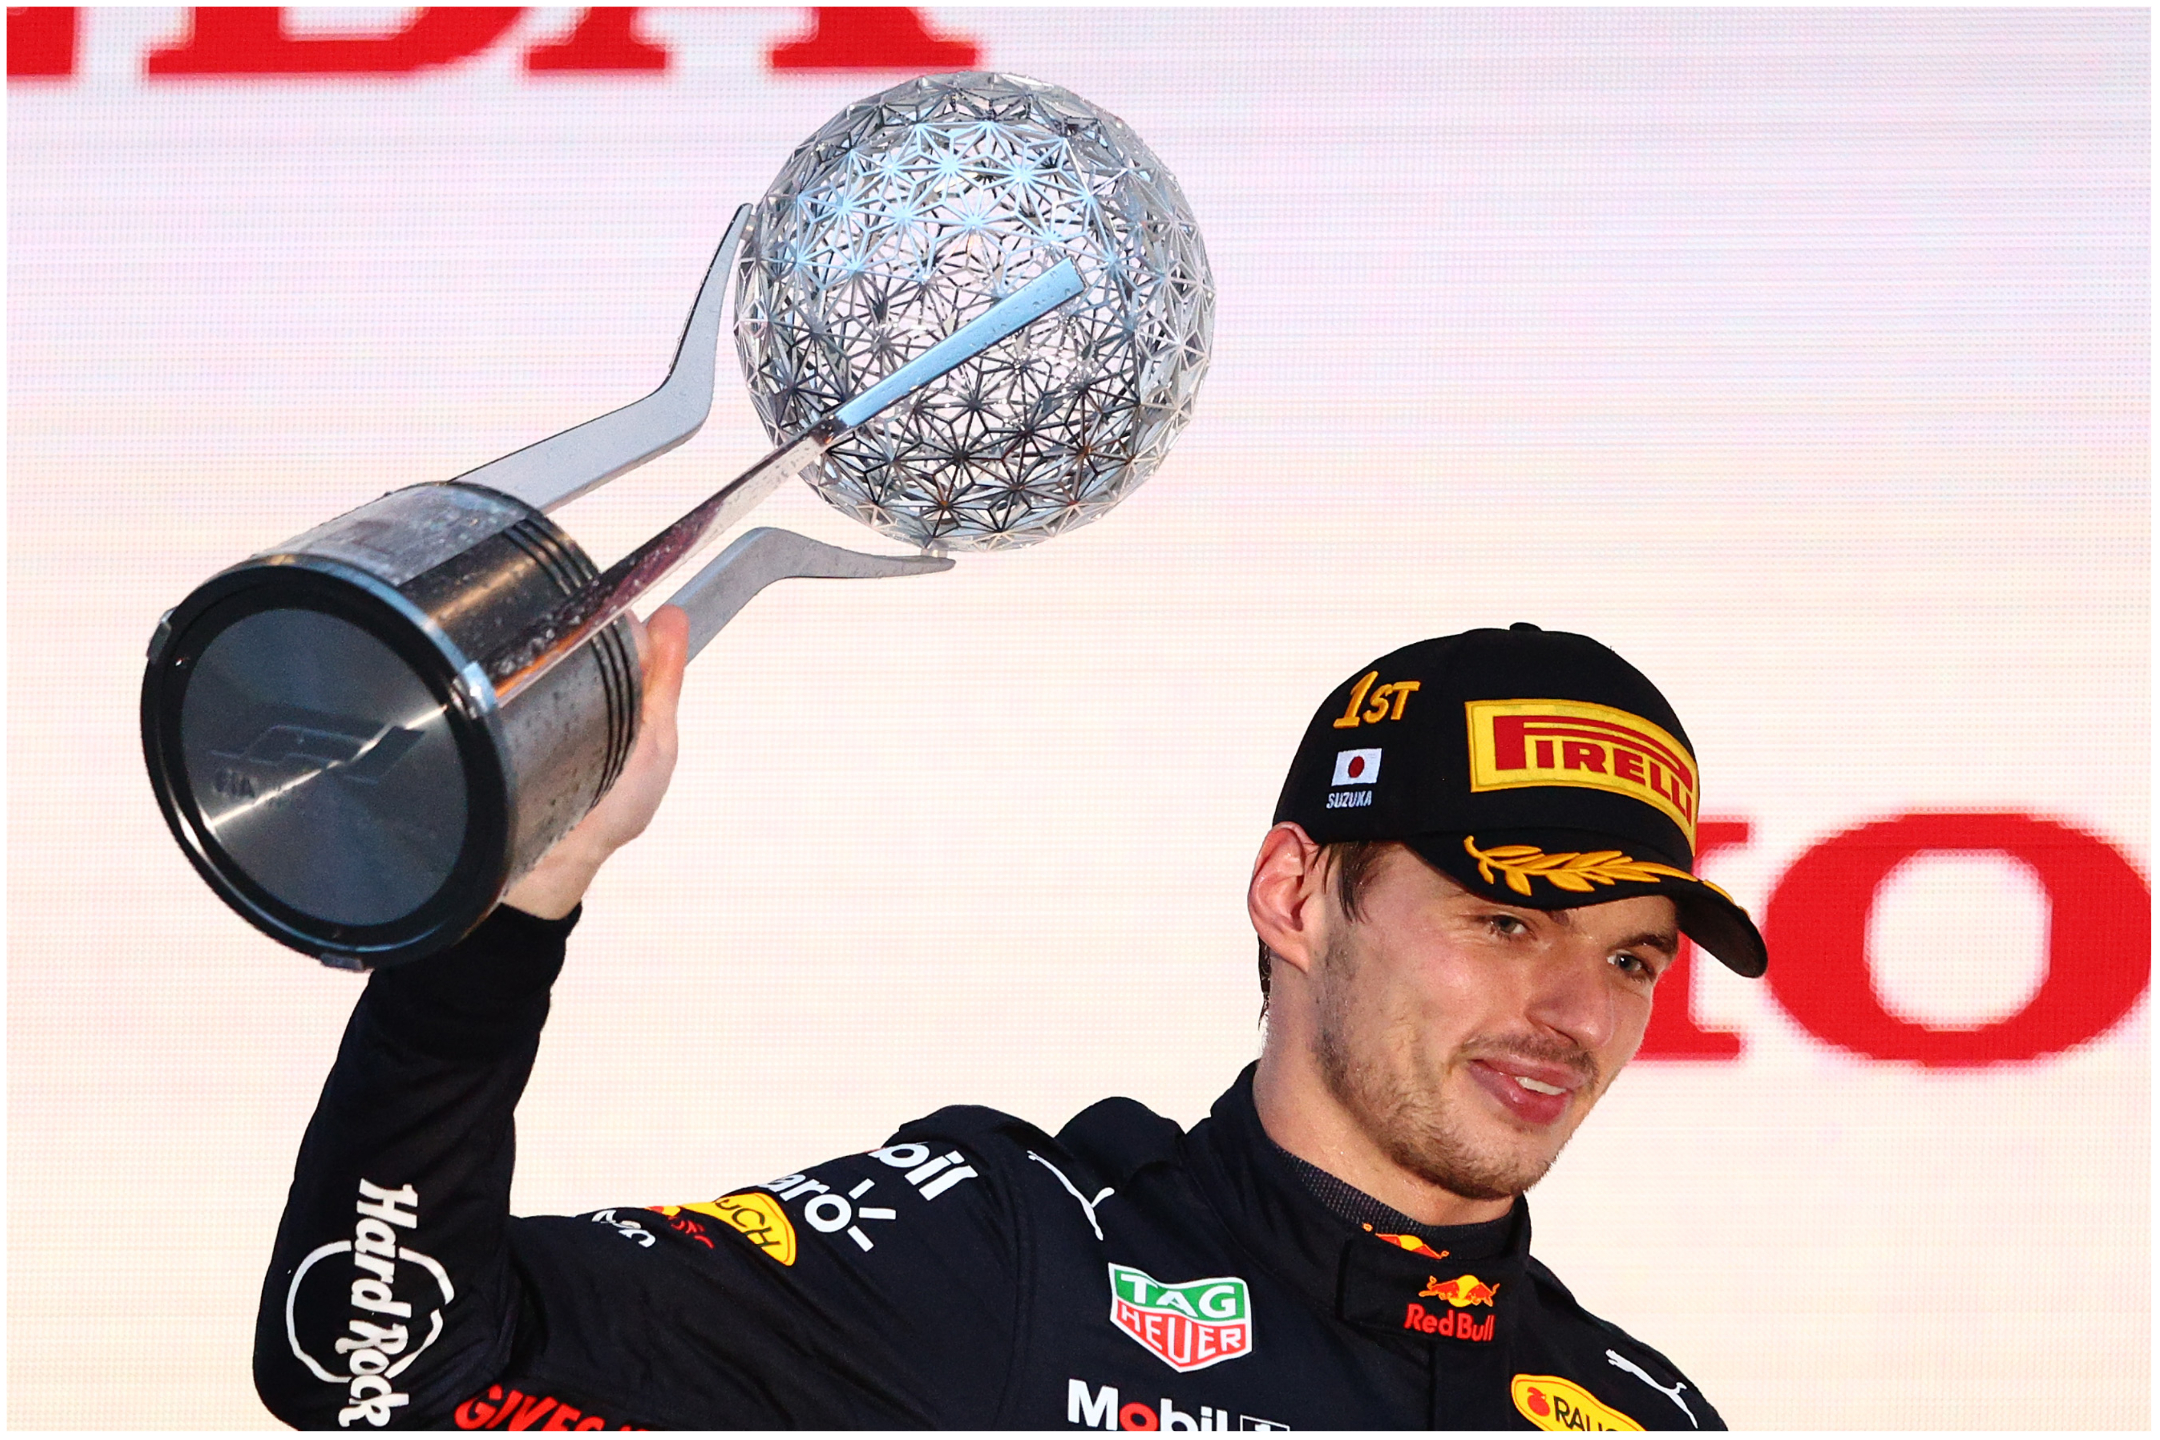 operatie Canberra leerling Formula 1: Max Verstappen Crowned World Champion After Chaotic Japan Race